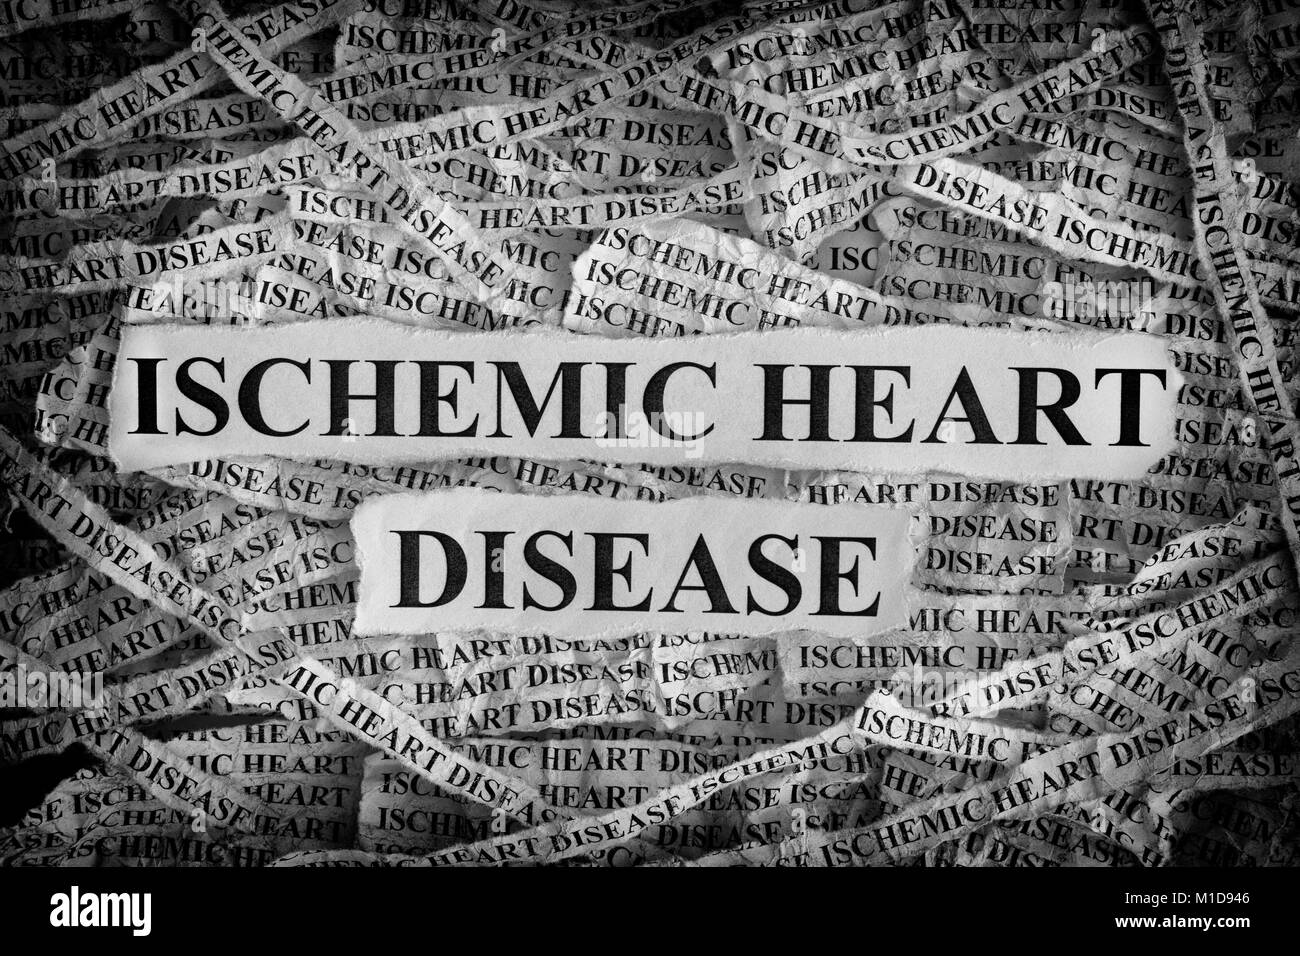 Ischemic heart disease. Torn pieces of paper with the words Ischemic Heart Disease. Concept Image. Black and White. Closeup. Stock Photo